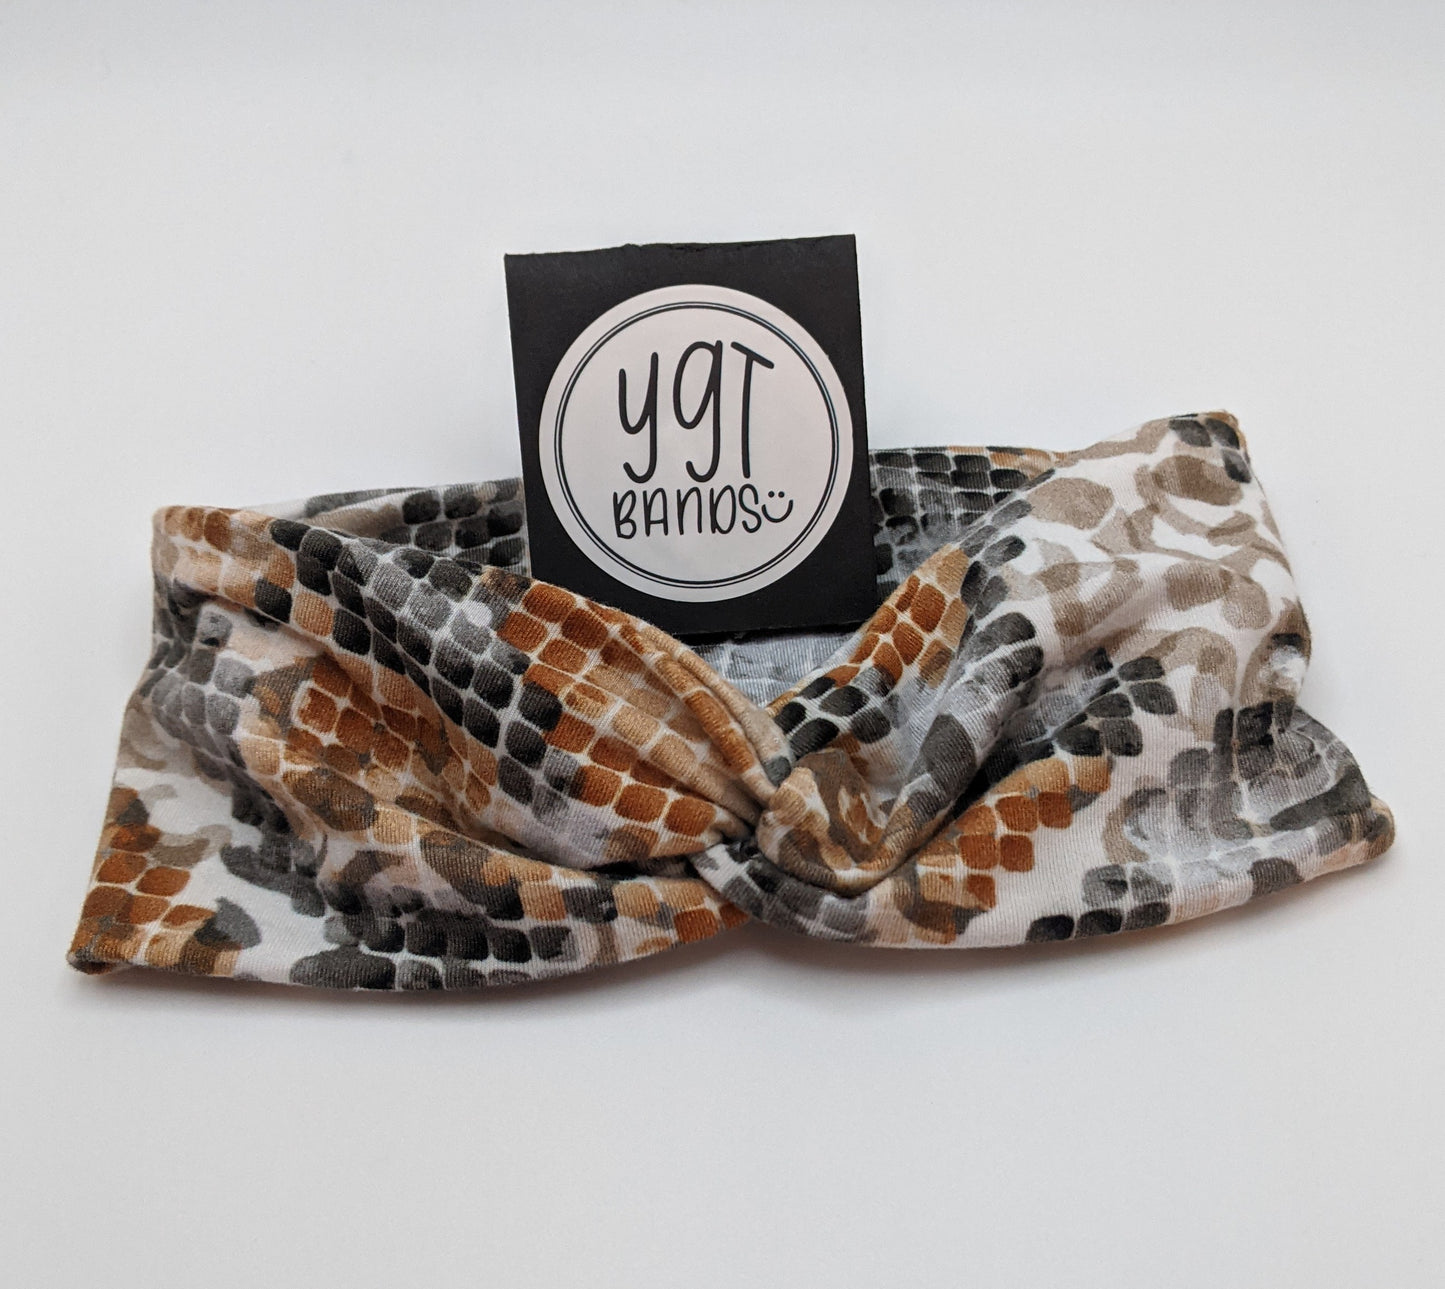 YGT-Twist Band/The Luca **SALE** 40% off at checkout